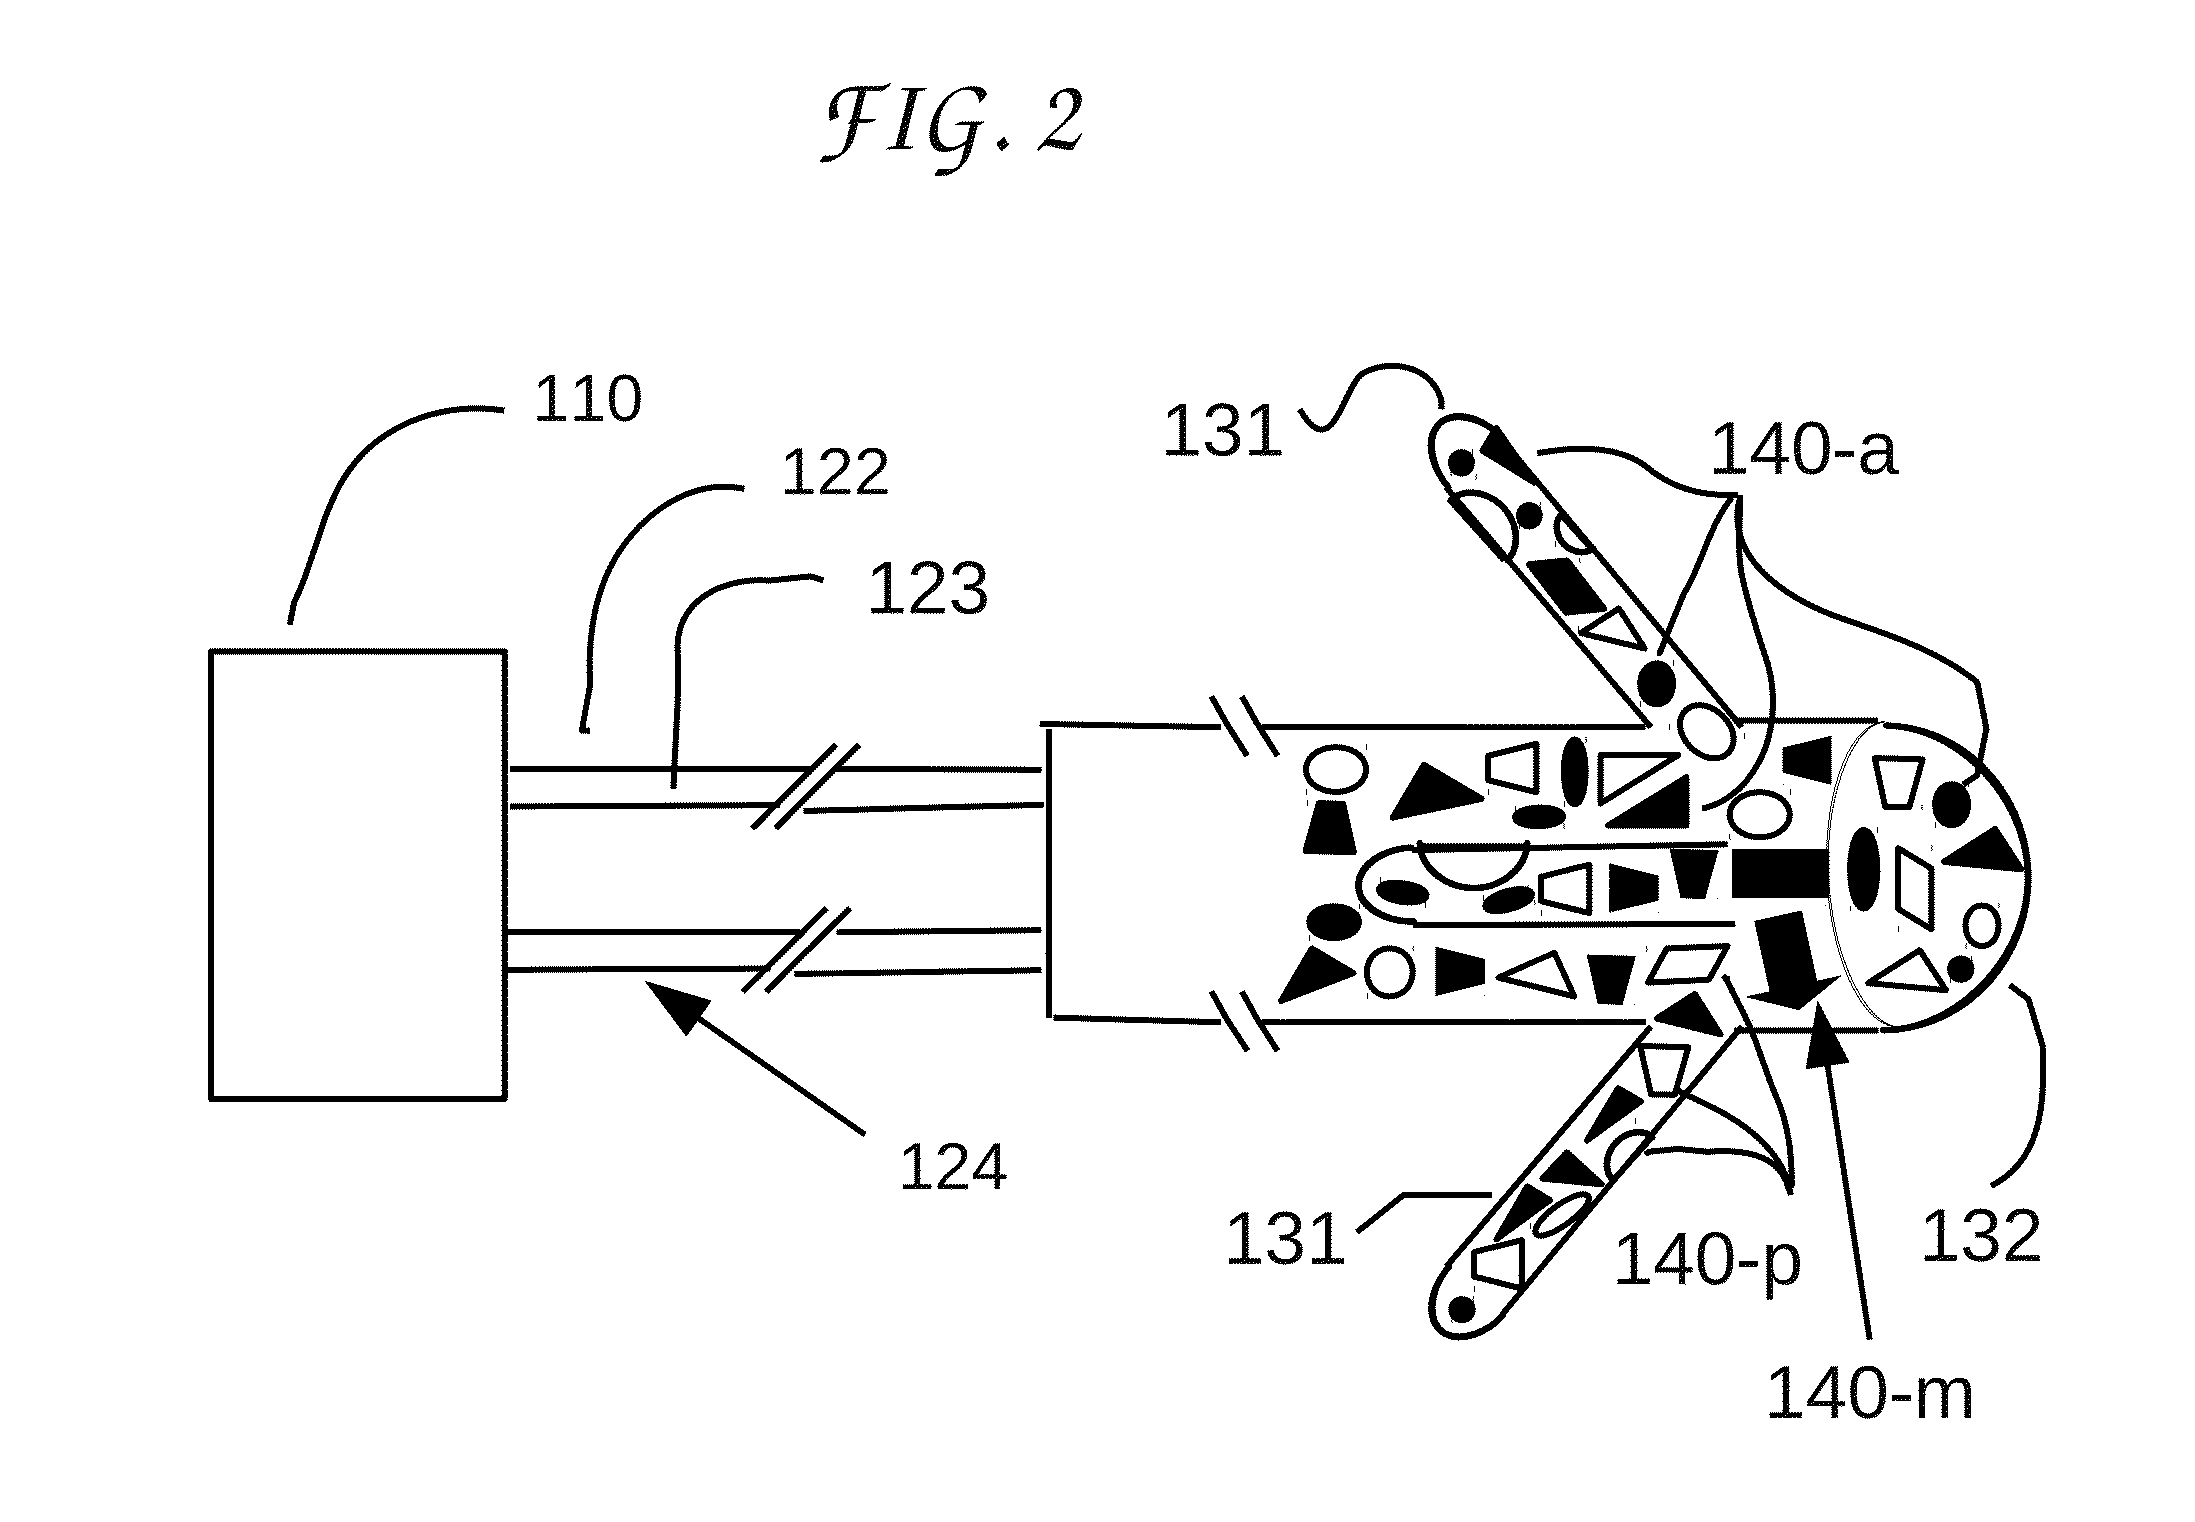 Animal and plant cell electric stimulator with randomized spatial distribution of electrodes for both current injection and for electric field shaping